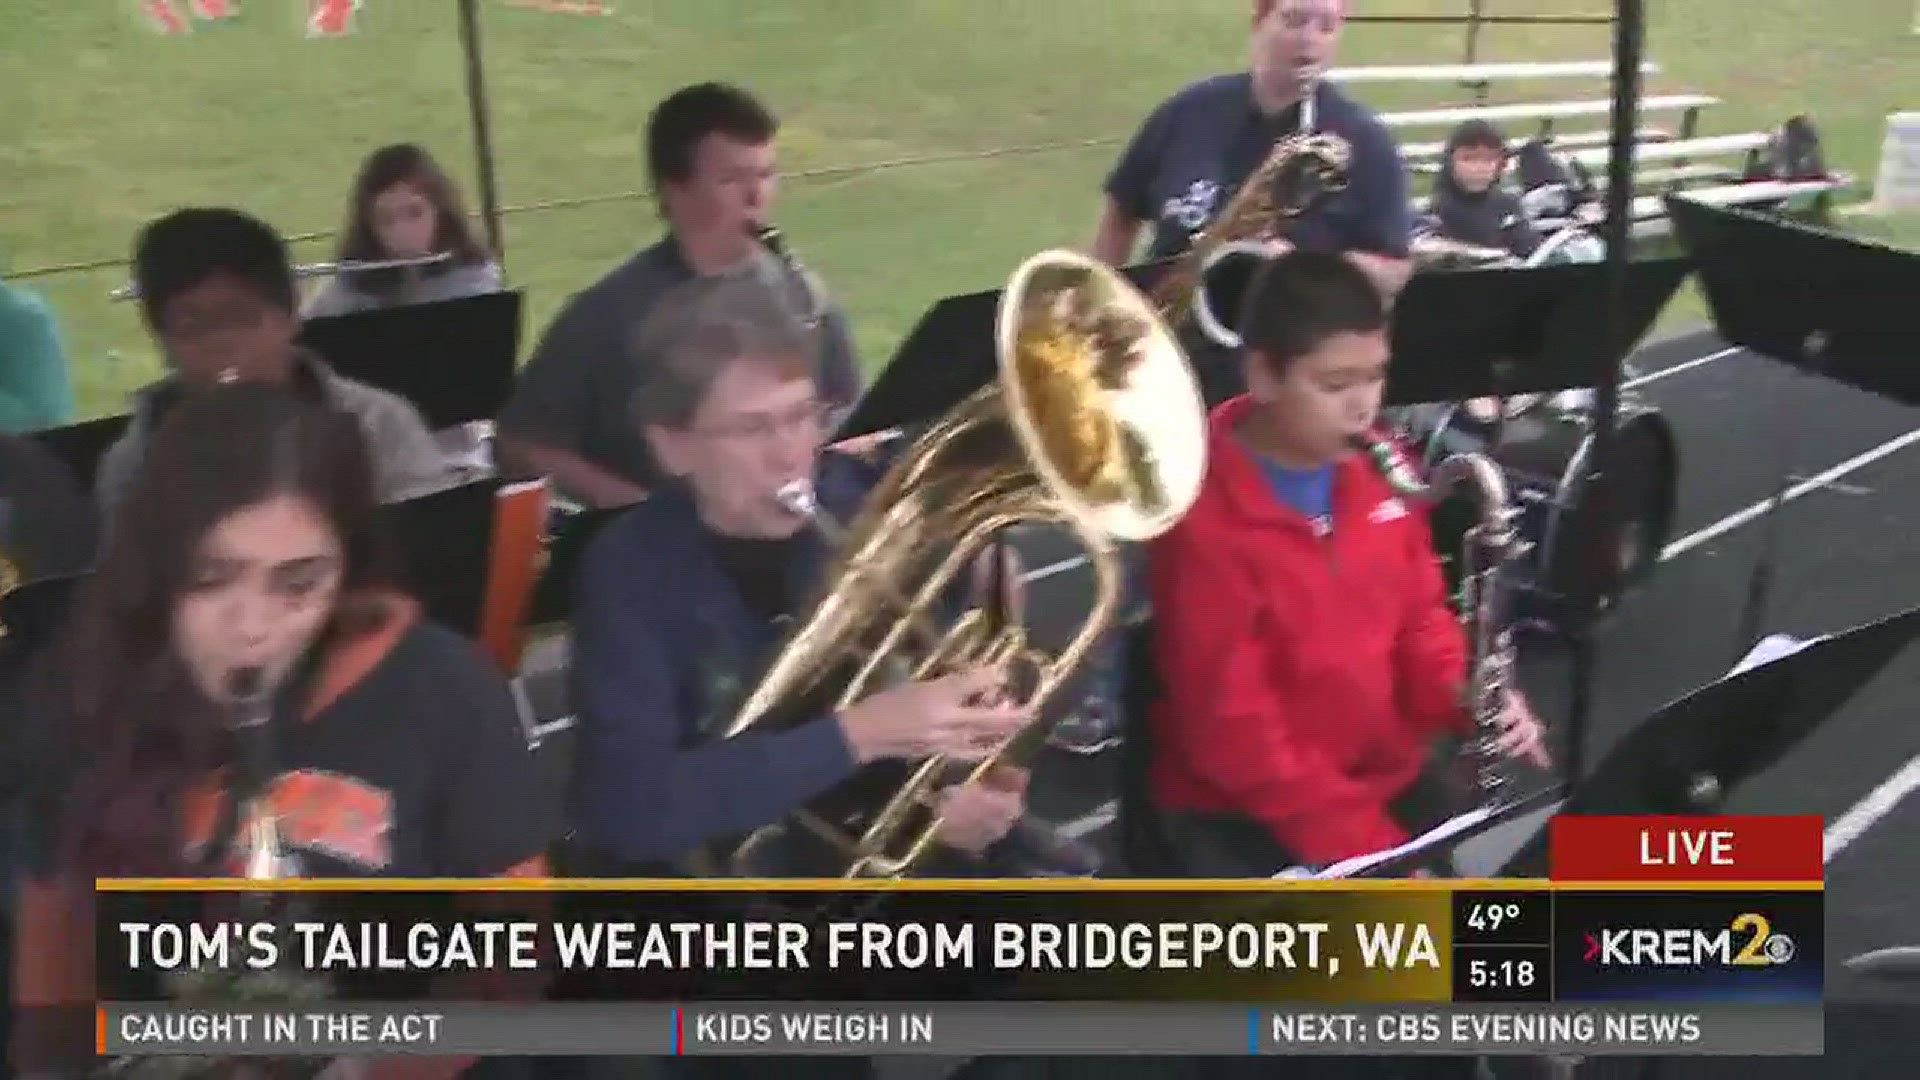 KREM 2's Tom Sherry talks to the band at Bridgeport High School during his Tom's Tailgate Weather segment. (Oct. 21, 2016 at